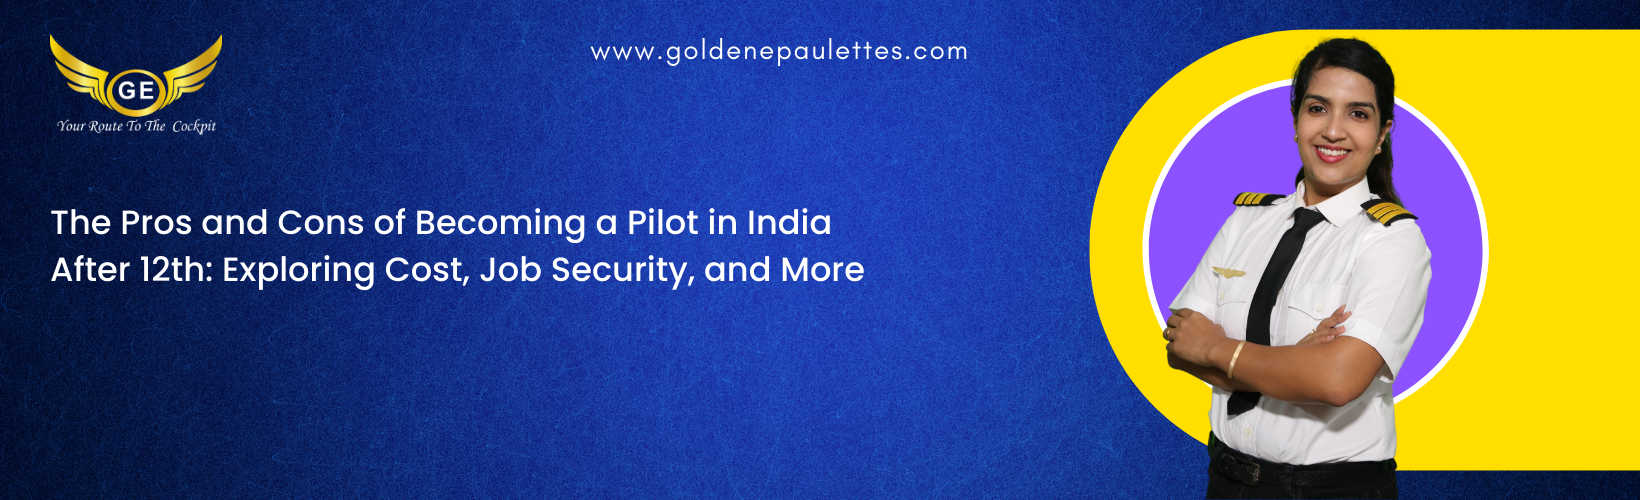 The Pros and Cons of Becoming a Pilot in India After 12th